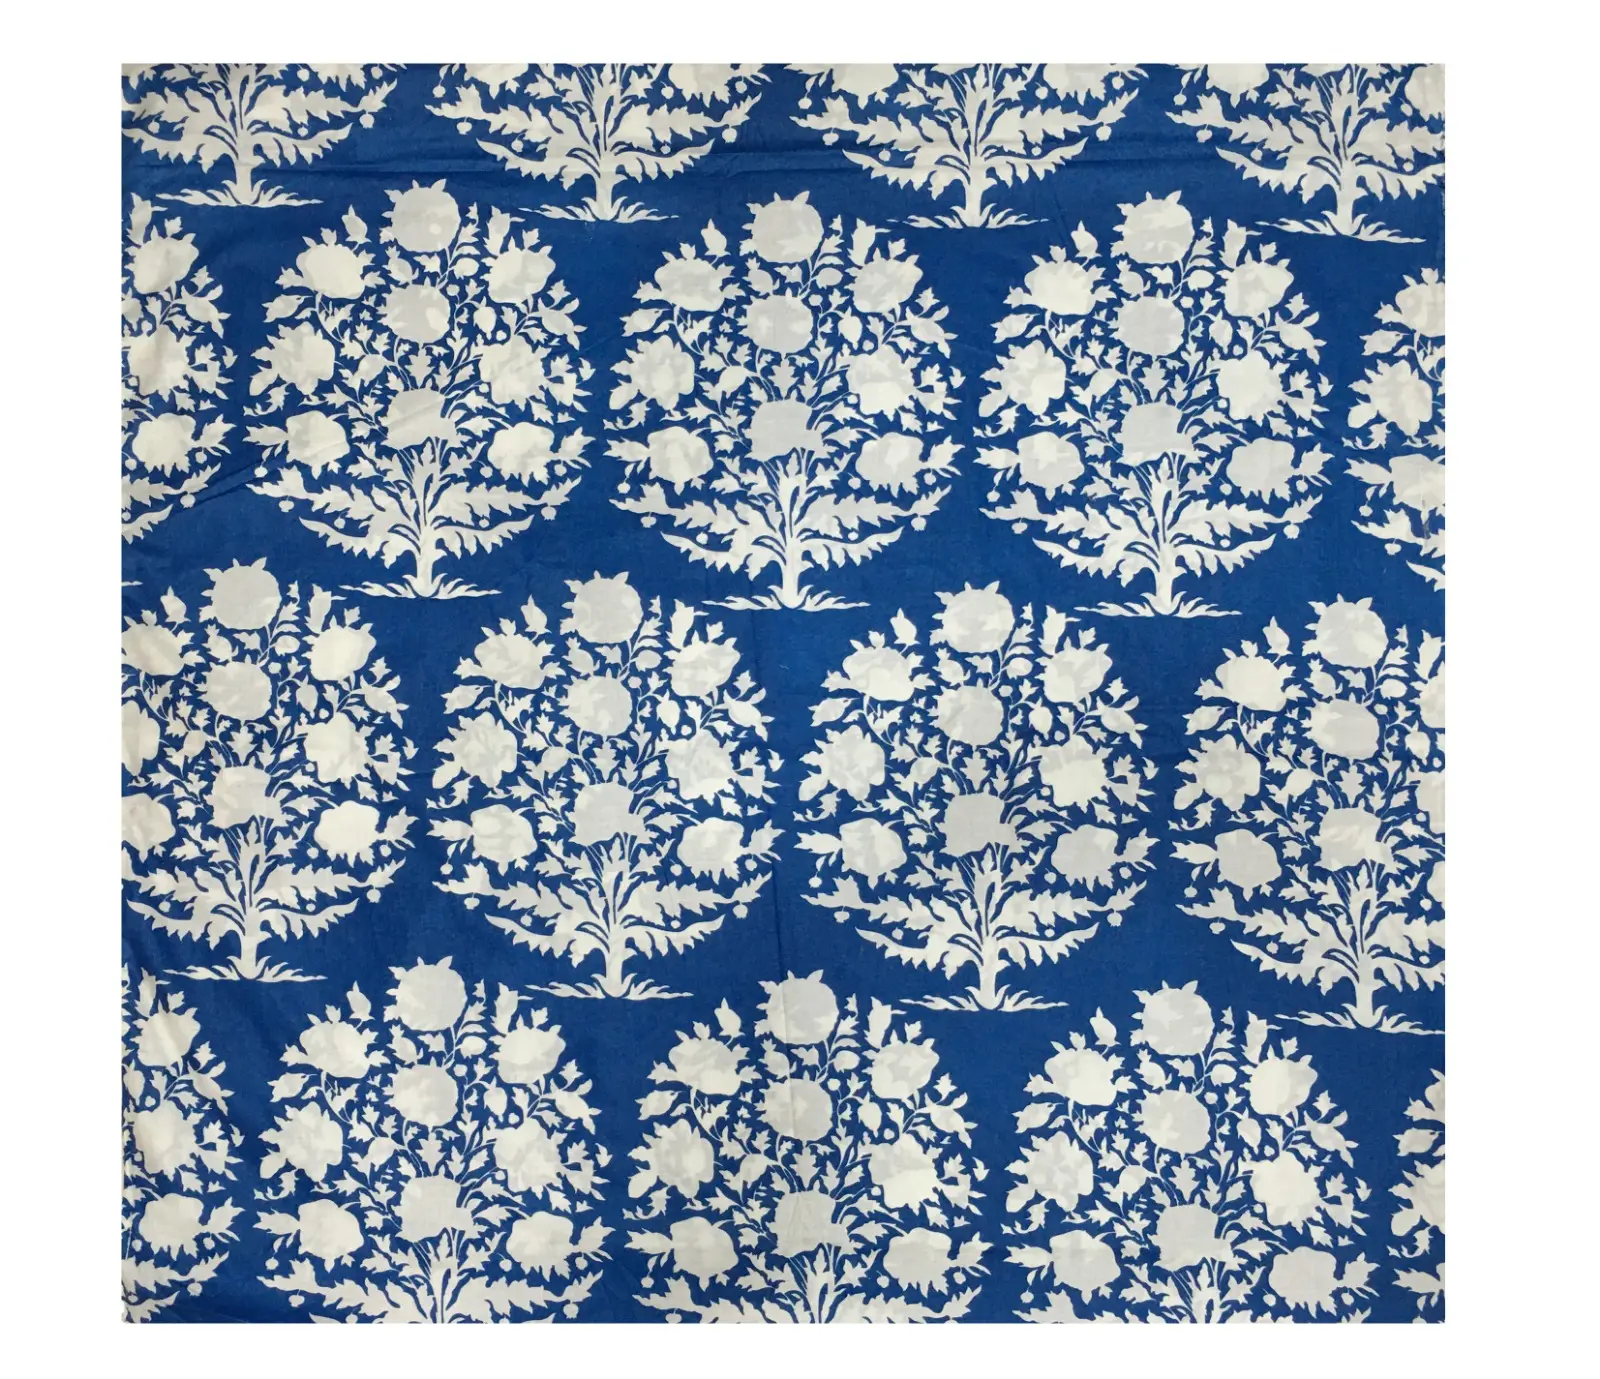 Handmade Indigo Dye Natural Fabric Cotton Block Print Dress Material Pure Cotton Soft and Breathable Raw Fabric For Dress Making